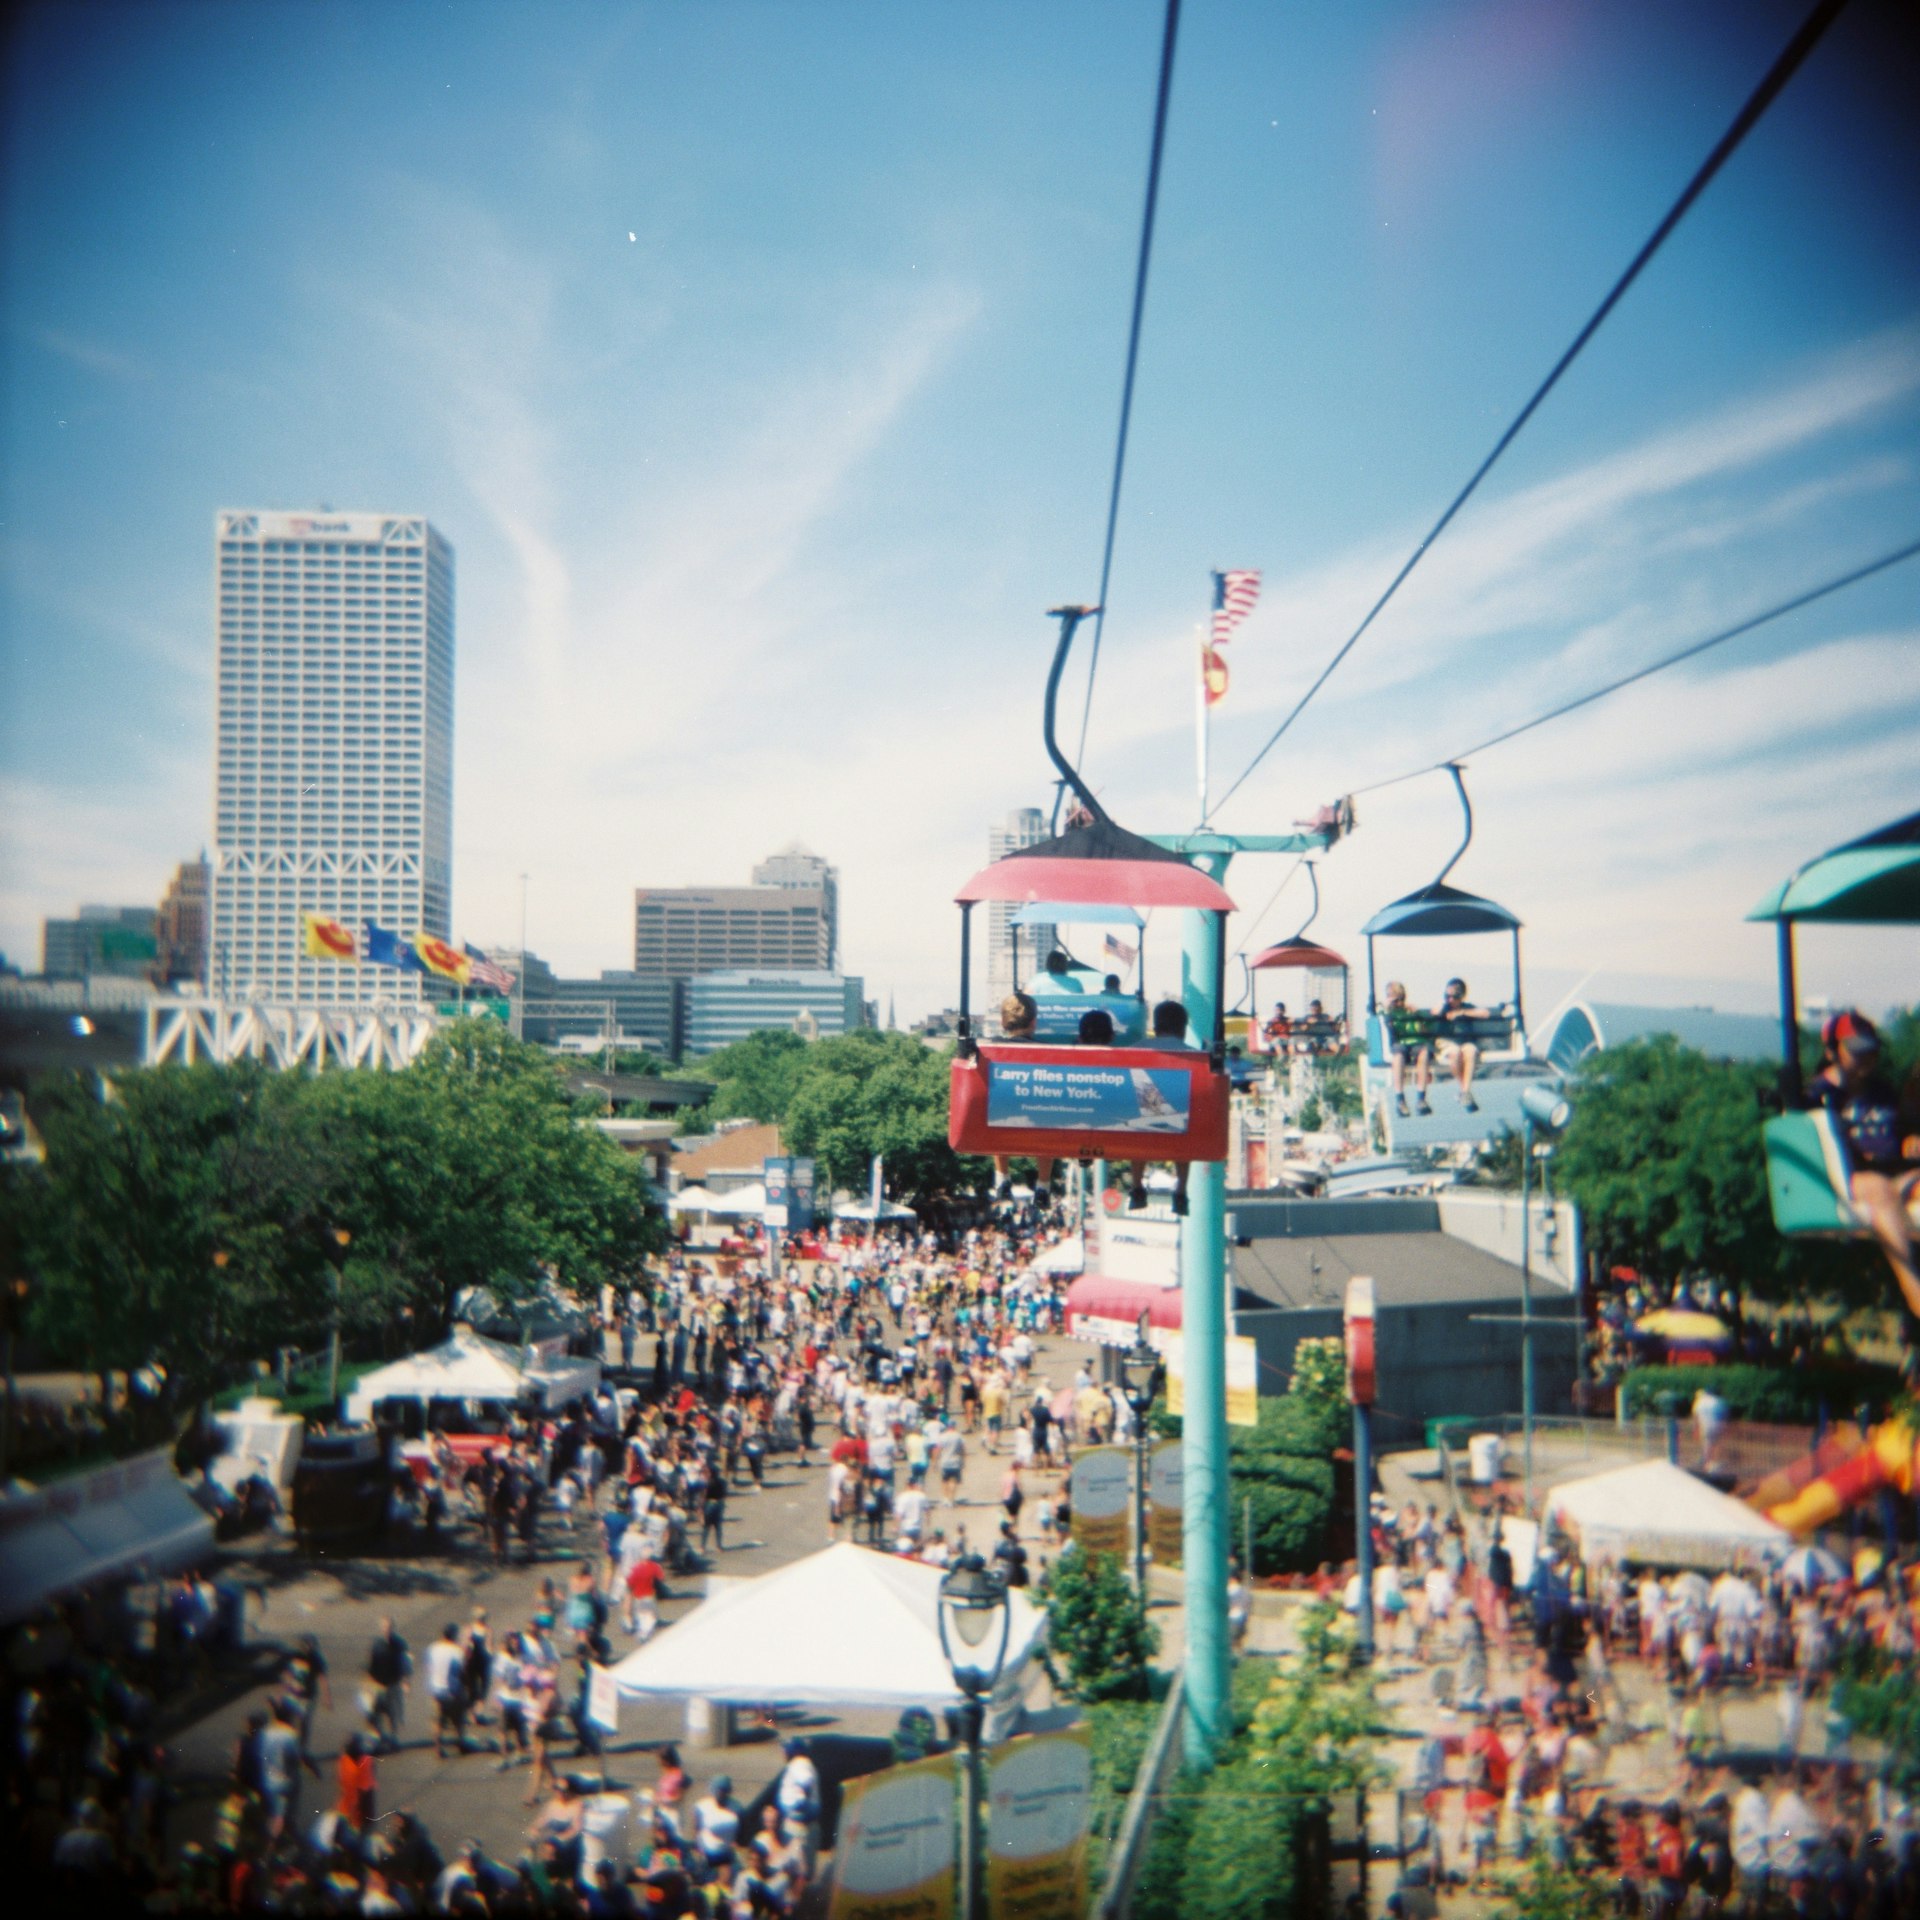 A gondola at Henry Maier Festival Park soars above crowds below and the skyline in the distance at Summerfest, Milwaukee, Wisconsin, USA